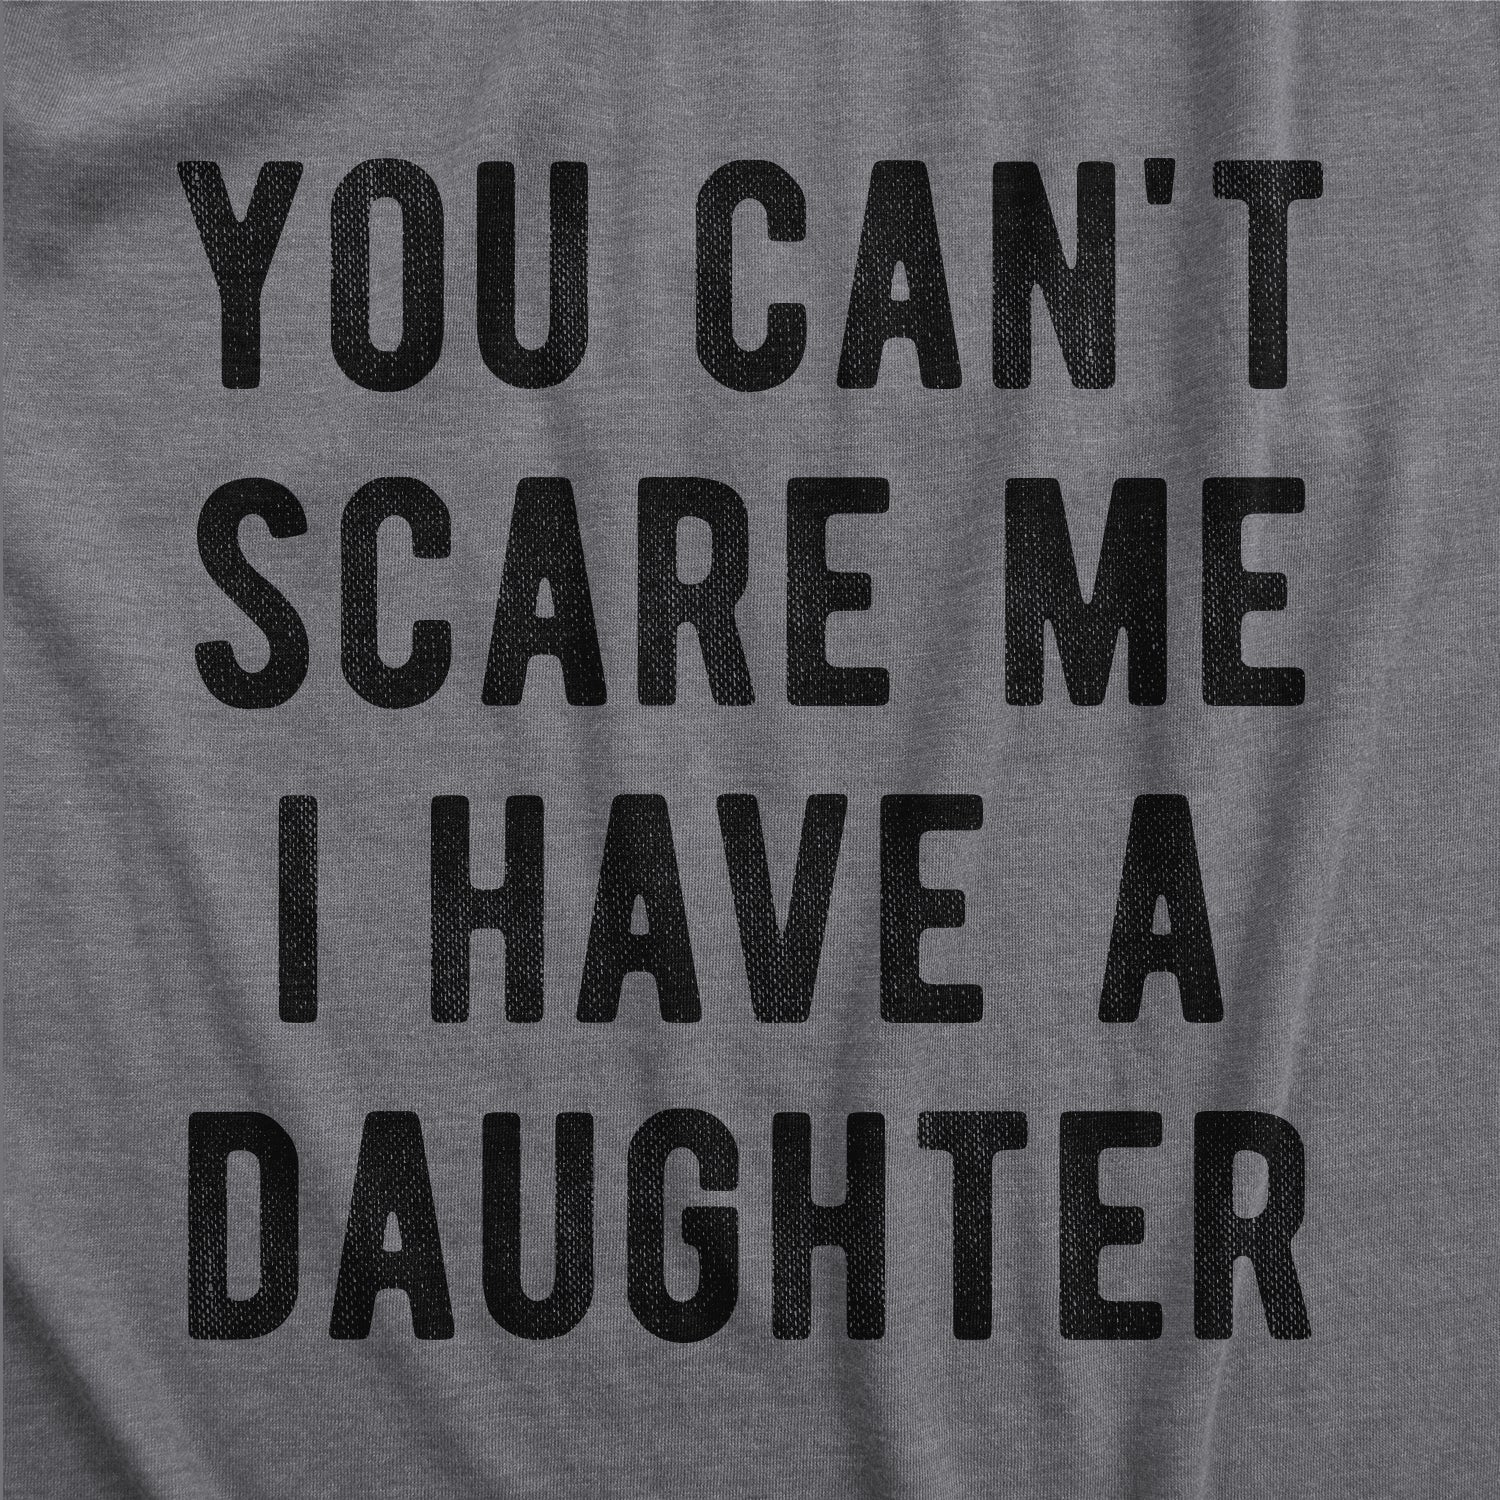 Funny Dark Heather Grey - A Daughter You Can't Scare Me I Have A Daughter Mens T Shirt Nerdy Father's Day Sarcastic Tee